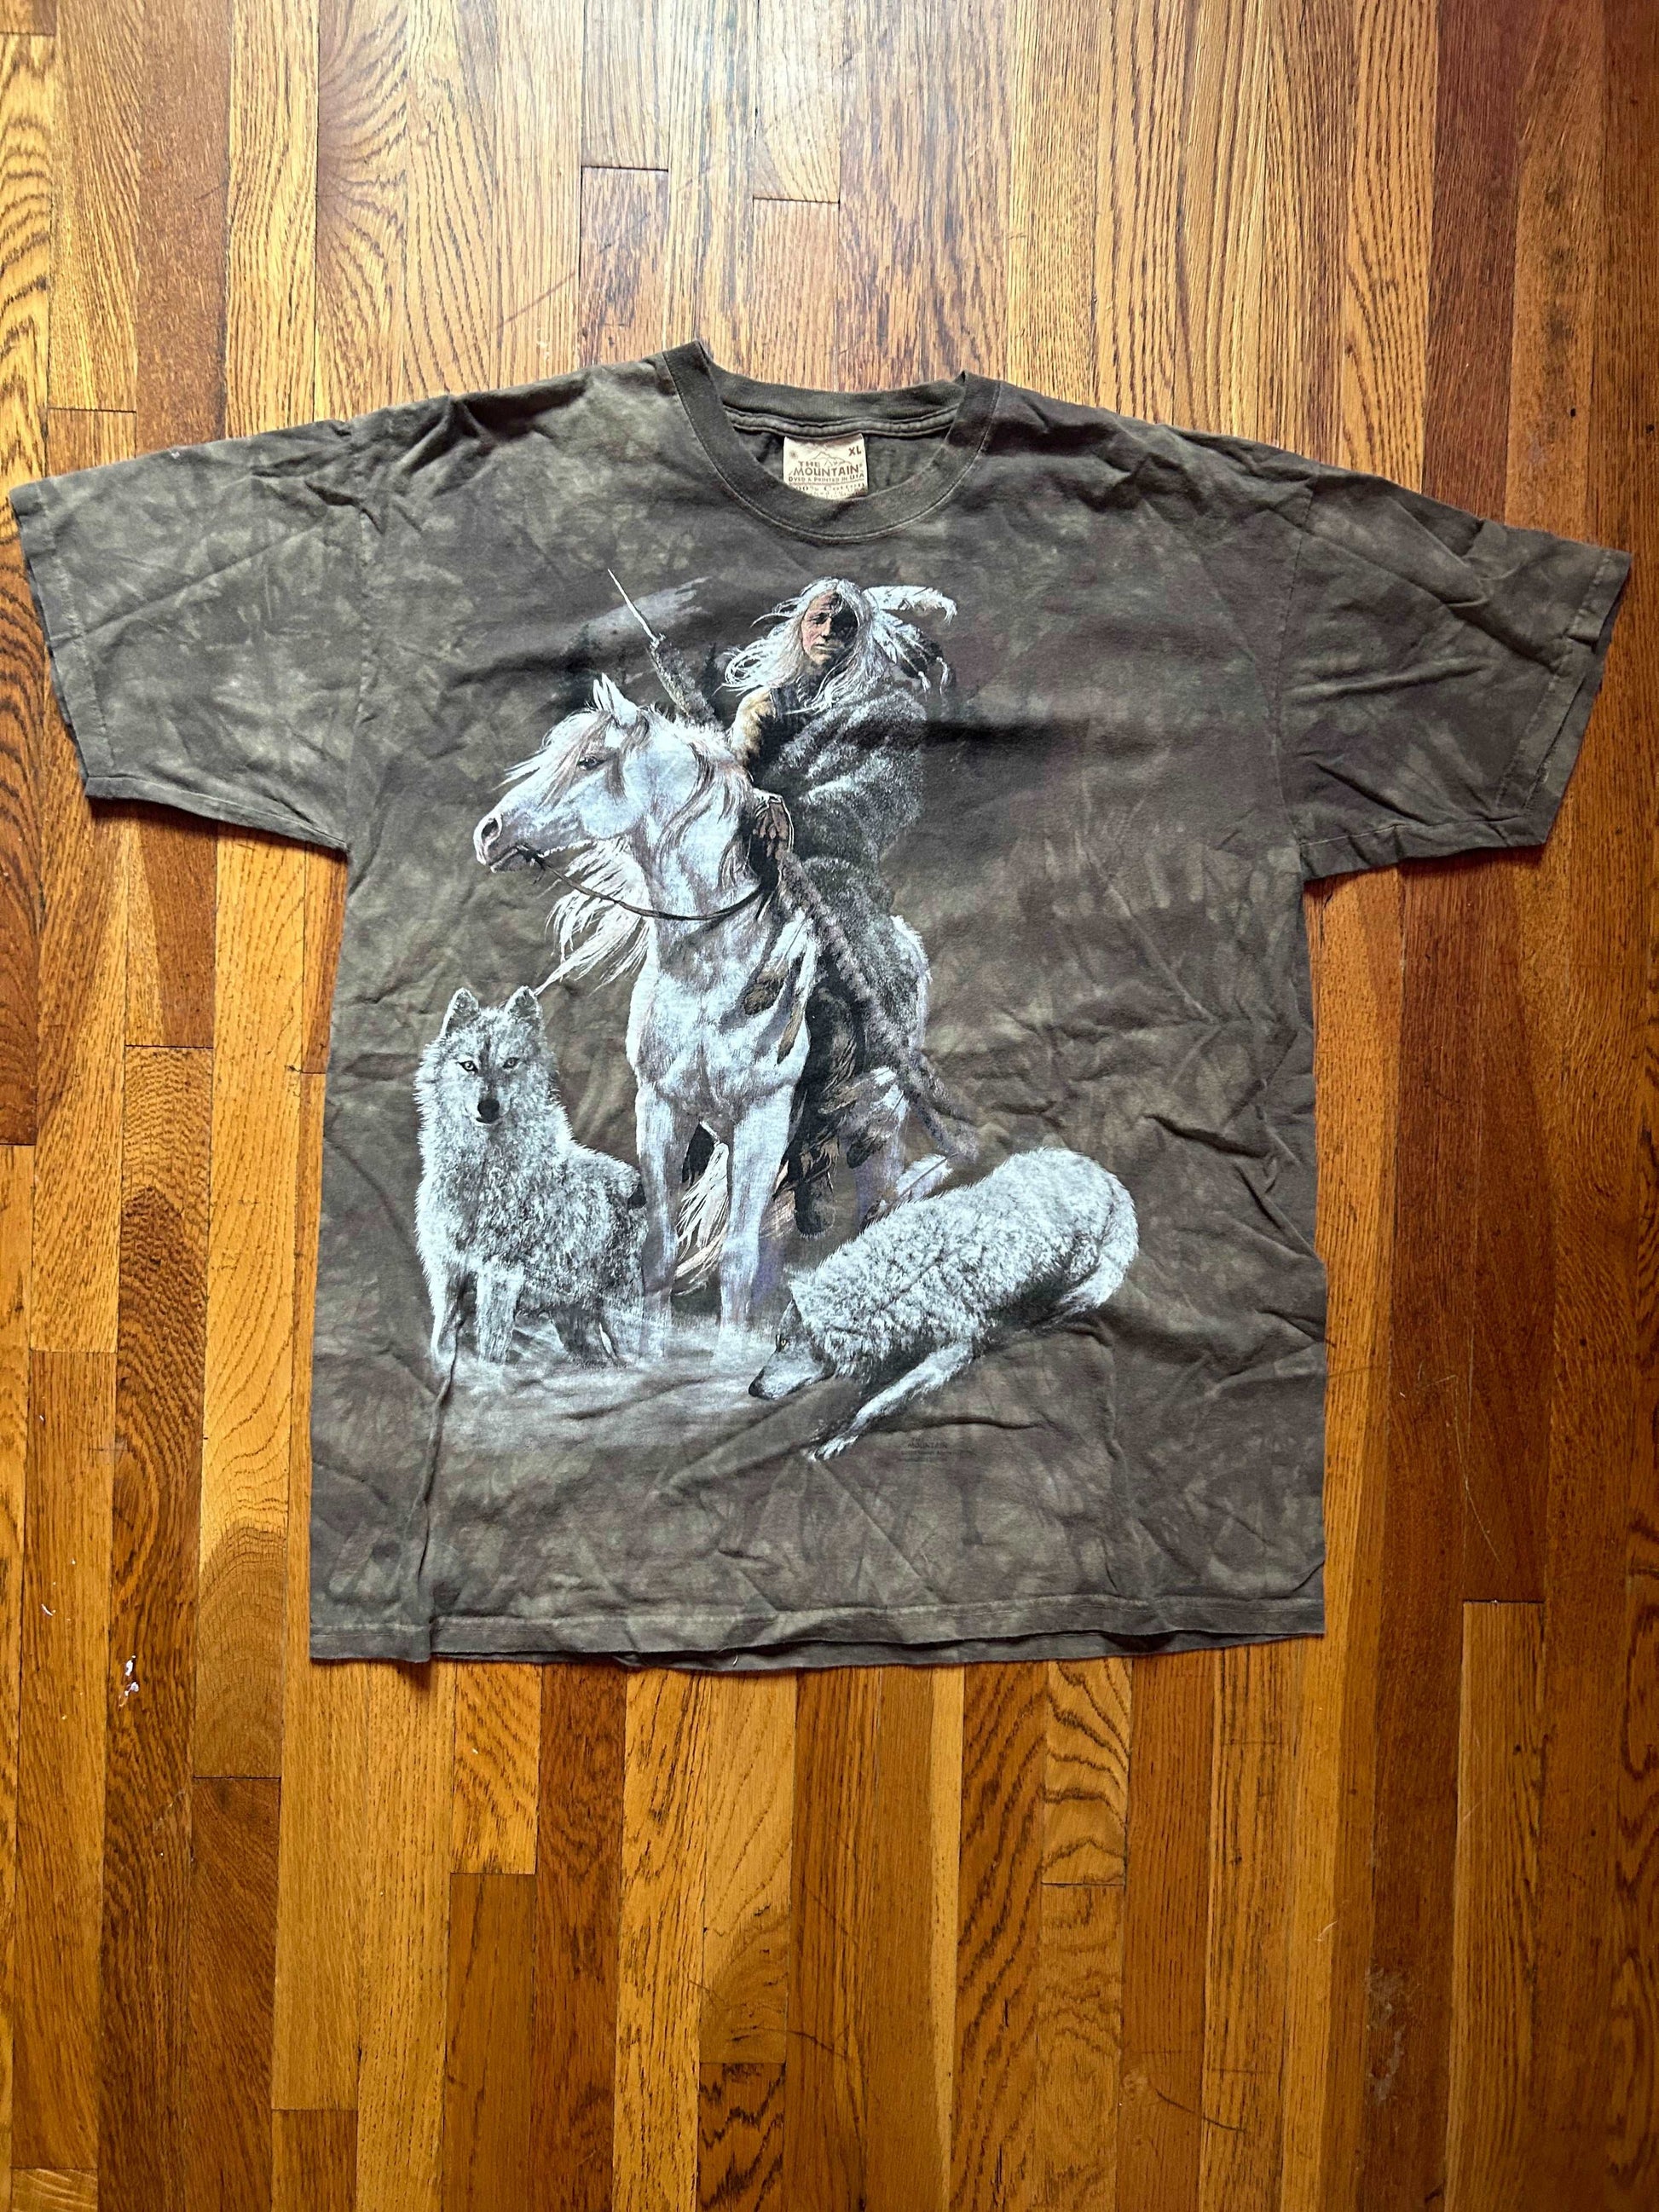 1990s The Mountain Indian Tee Size - XL